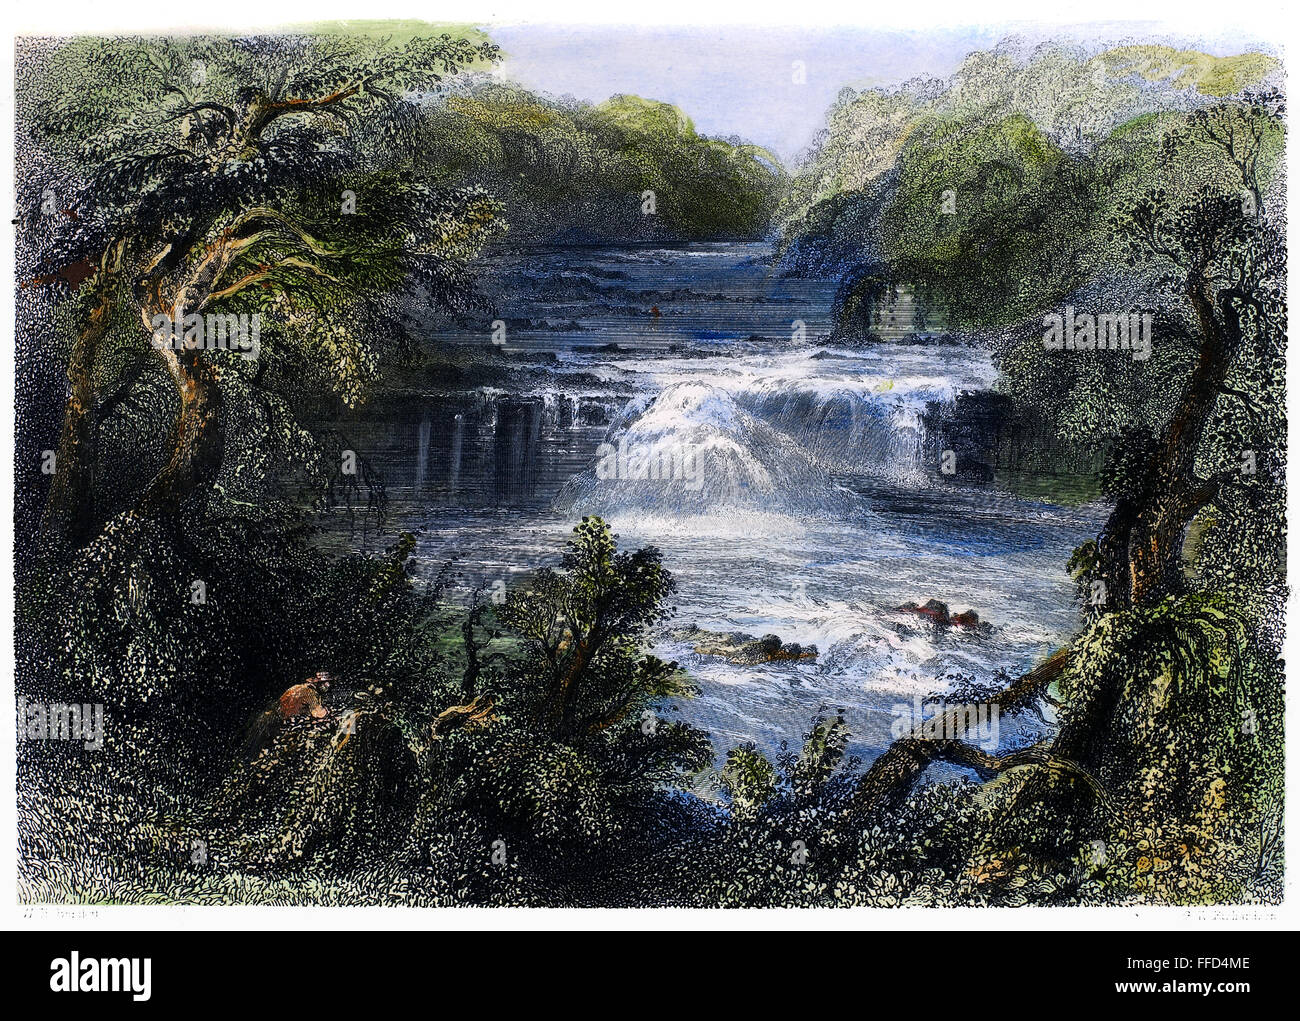 IRELAND: SALMON LEAP, c1840. /nView of the Salmon Leap at the confluence of the rivers Liffey and Rye at Leixlip, County Kildare, Ireland. Steel engraving, English, c1840, after William Henry Bartlett. Stock Photo